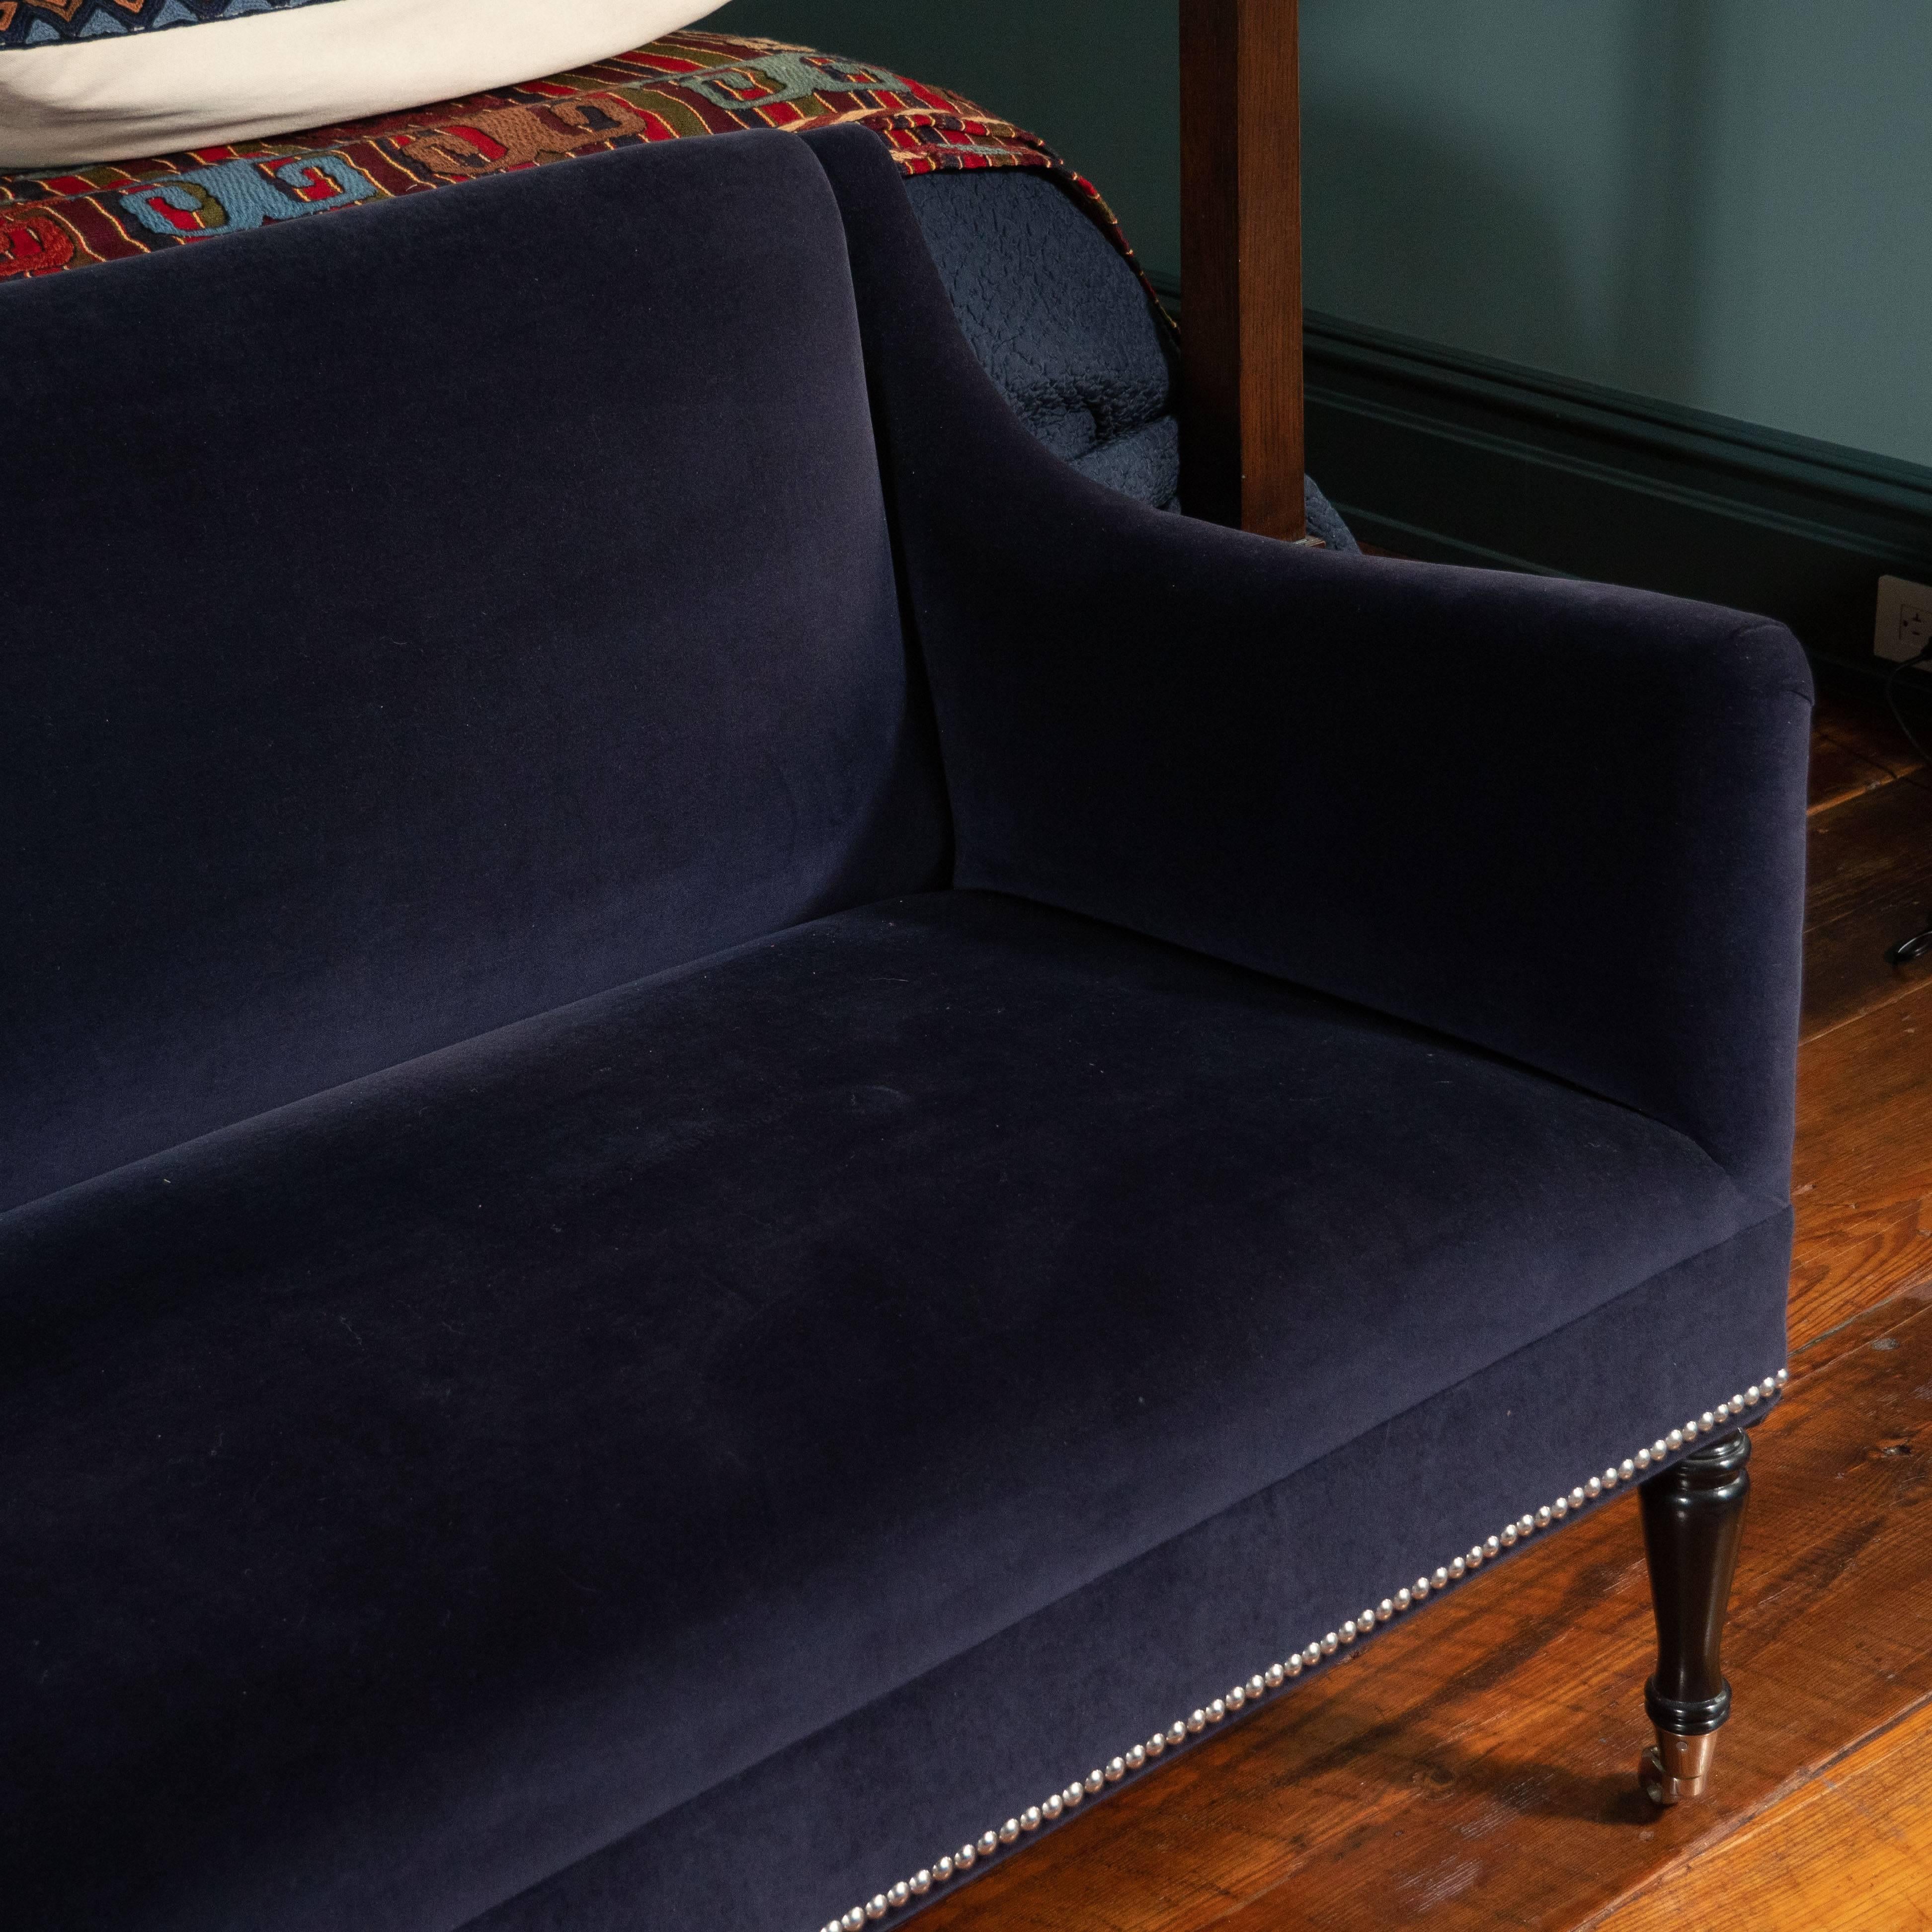 American Blue Velvet 'Ridgecrest' Loveseat with Nailheads by Barclay Butera